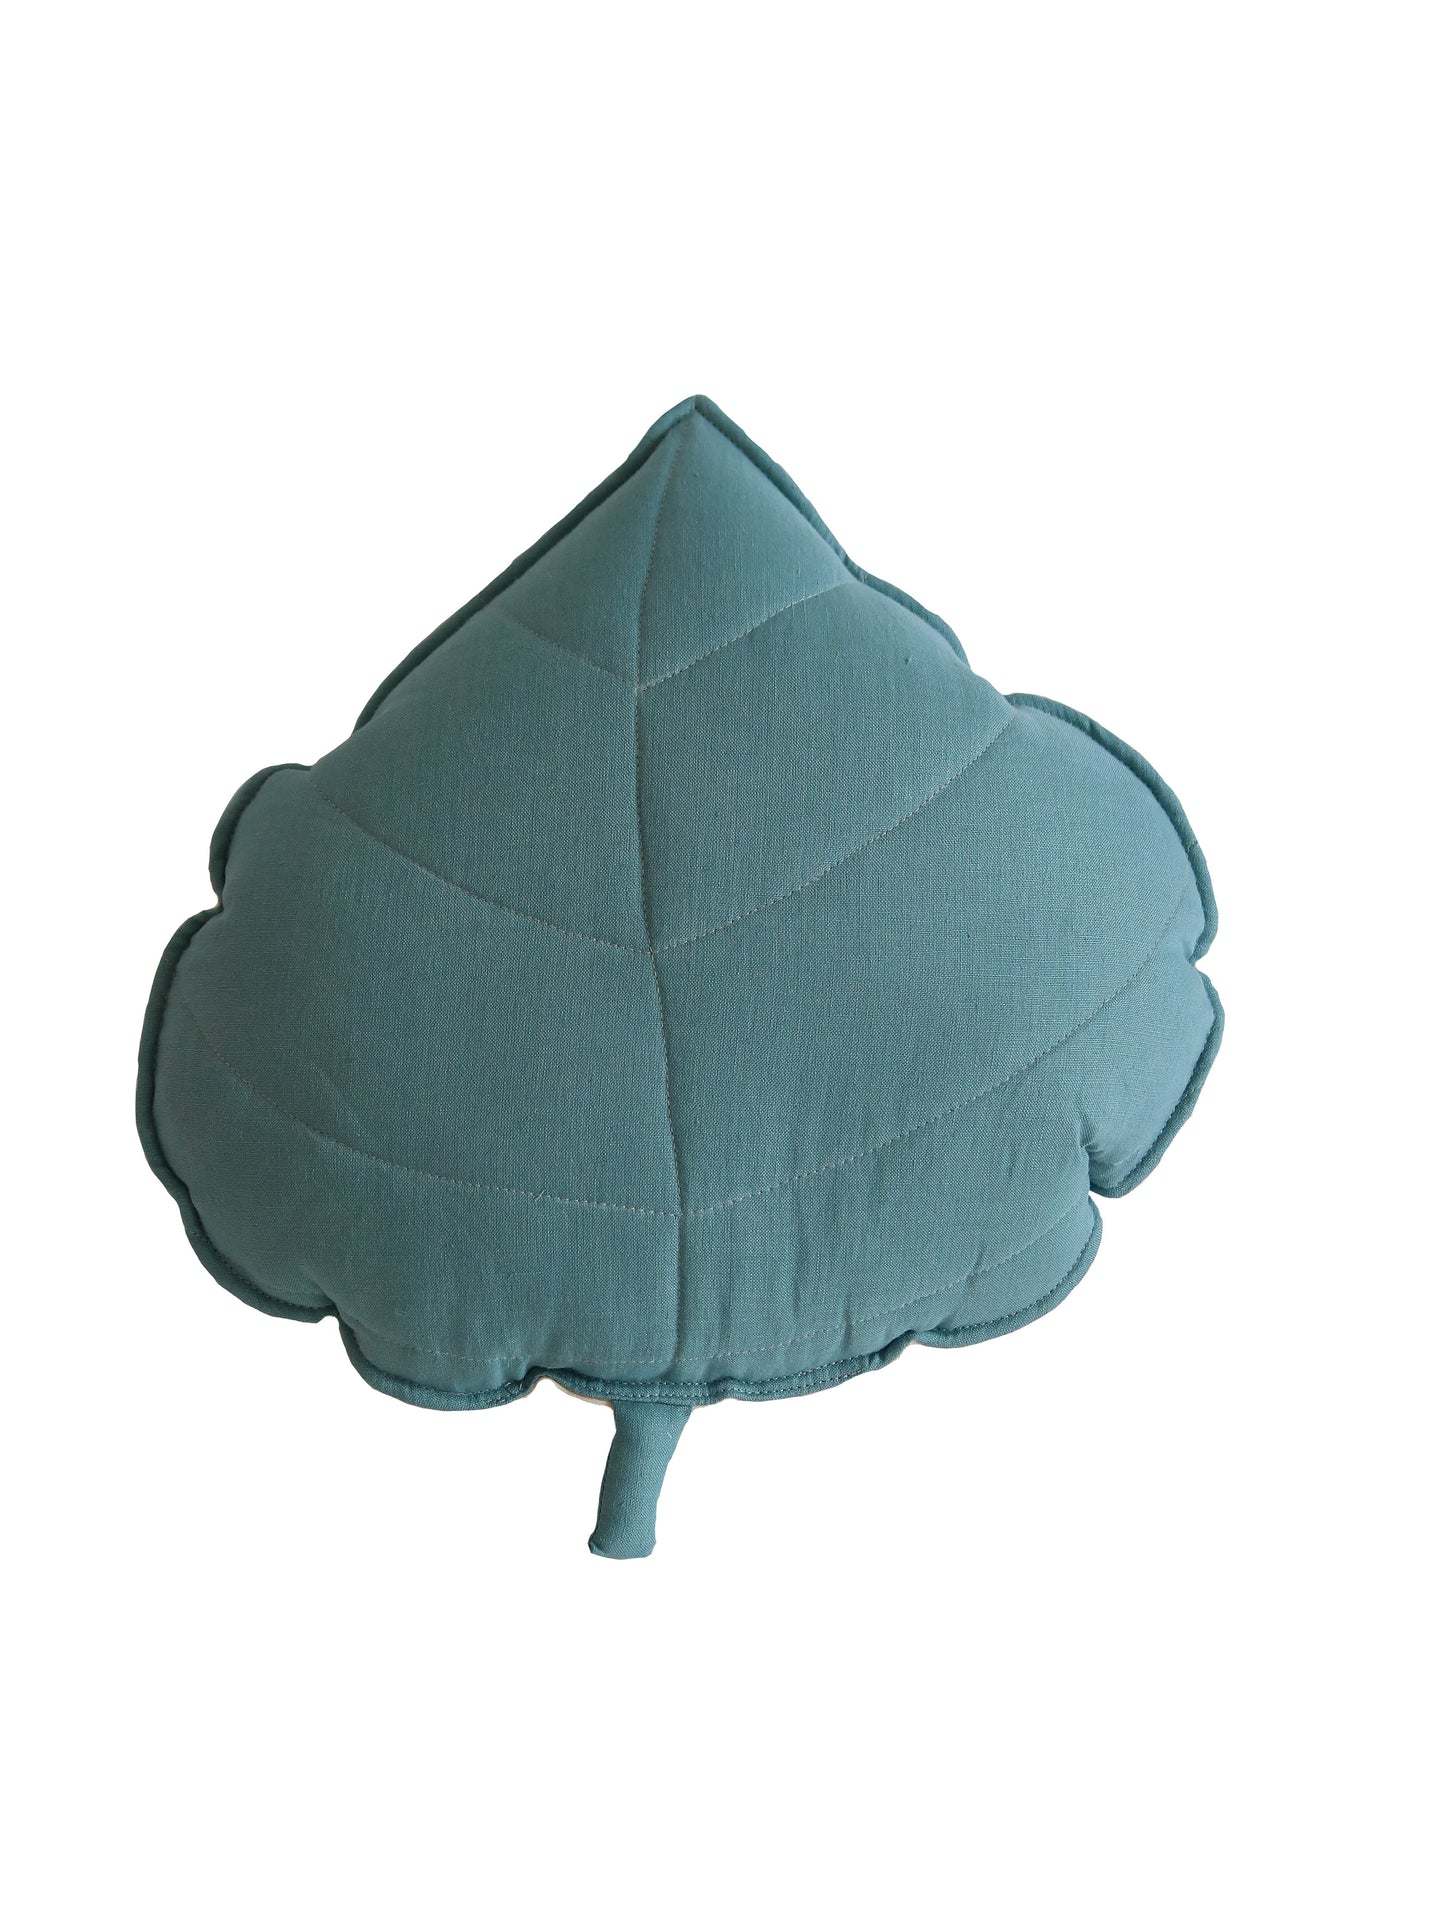 Linen “Eye of the Sea” Leaf Pillow